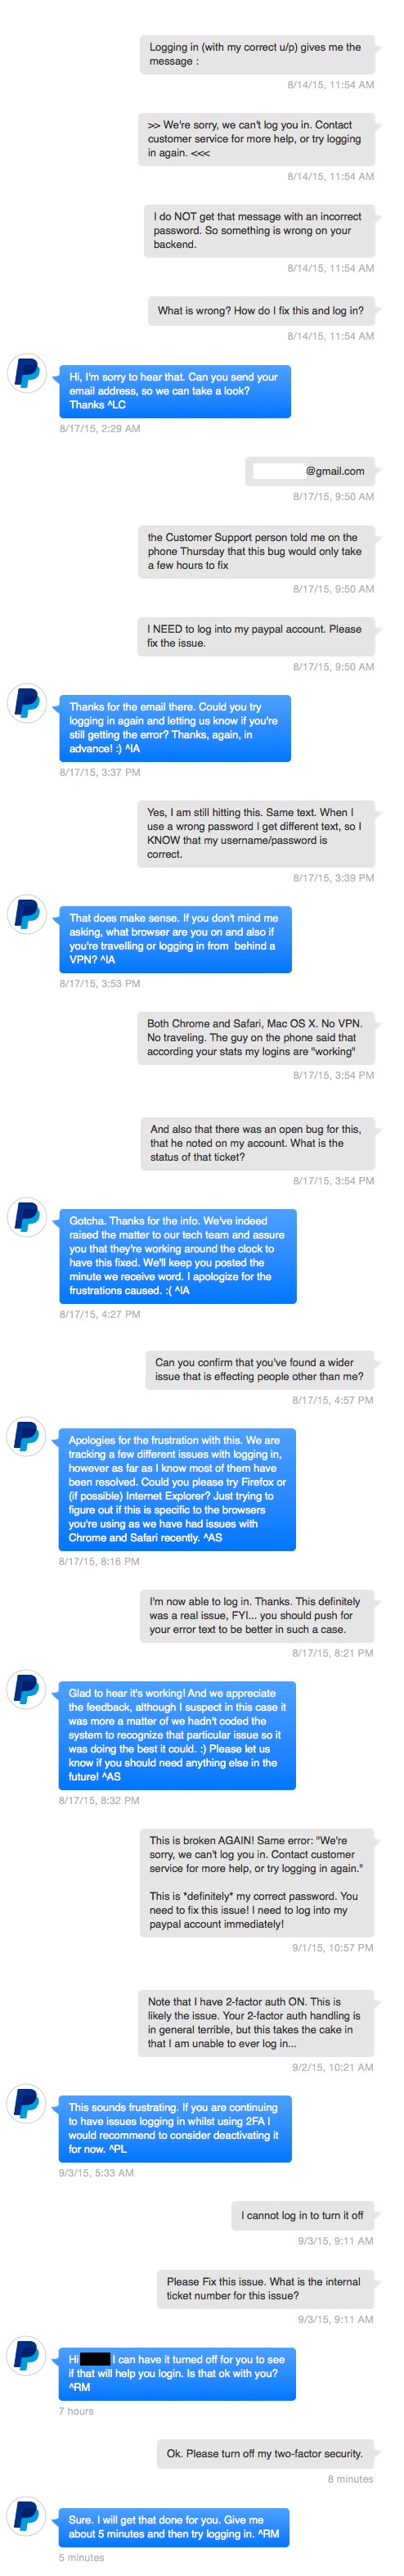 Paypal chat support